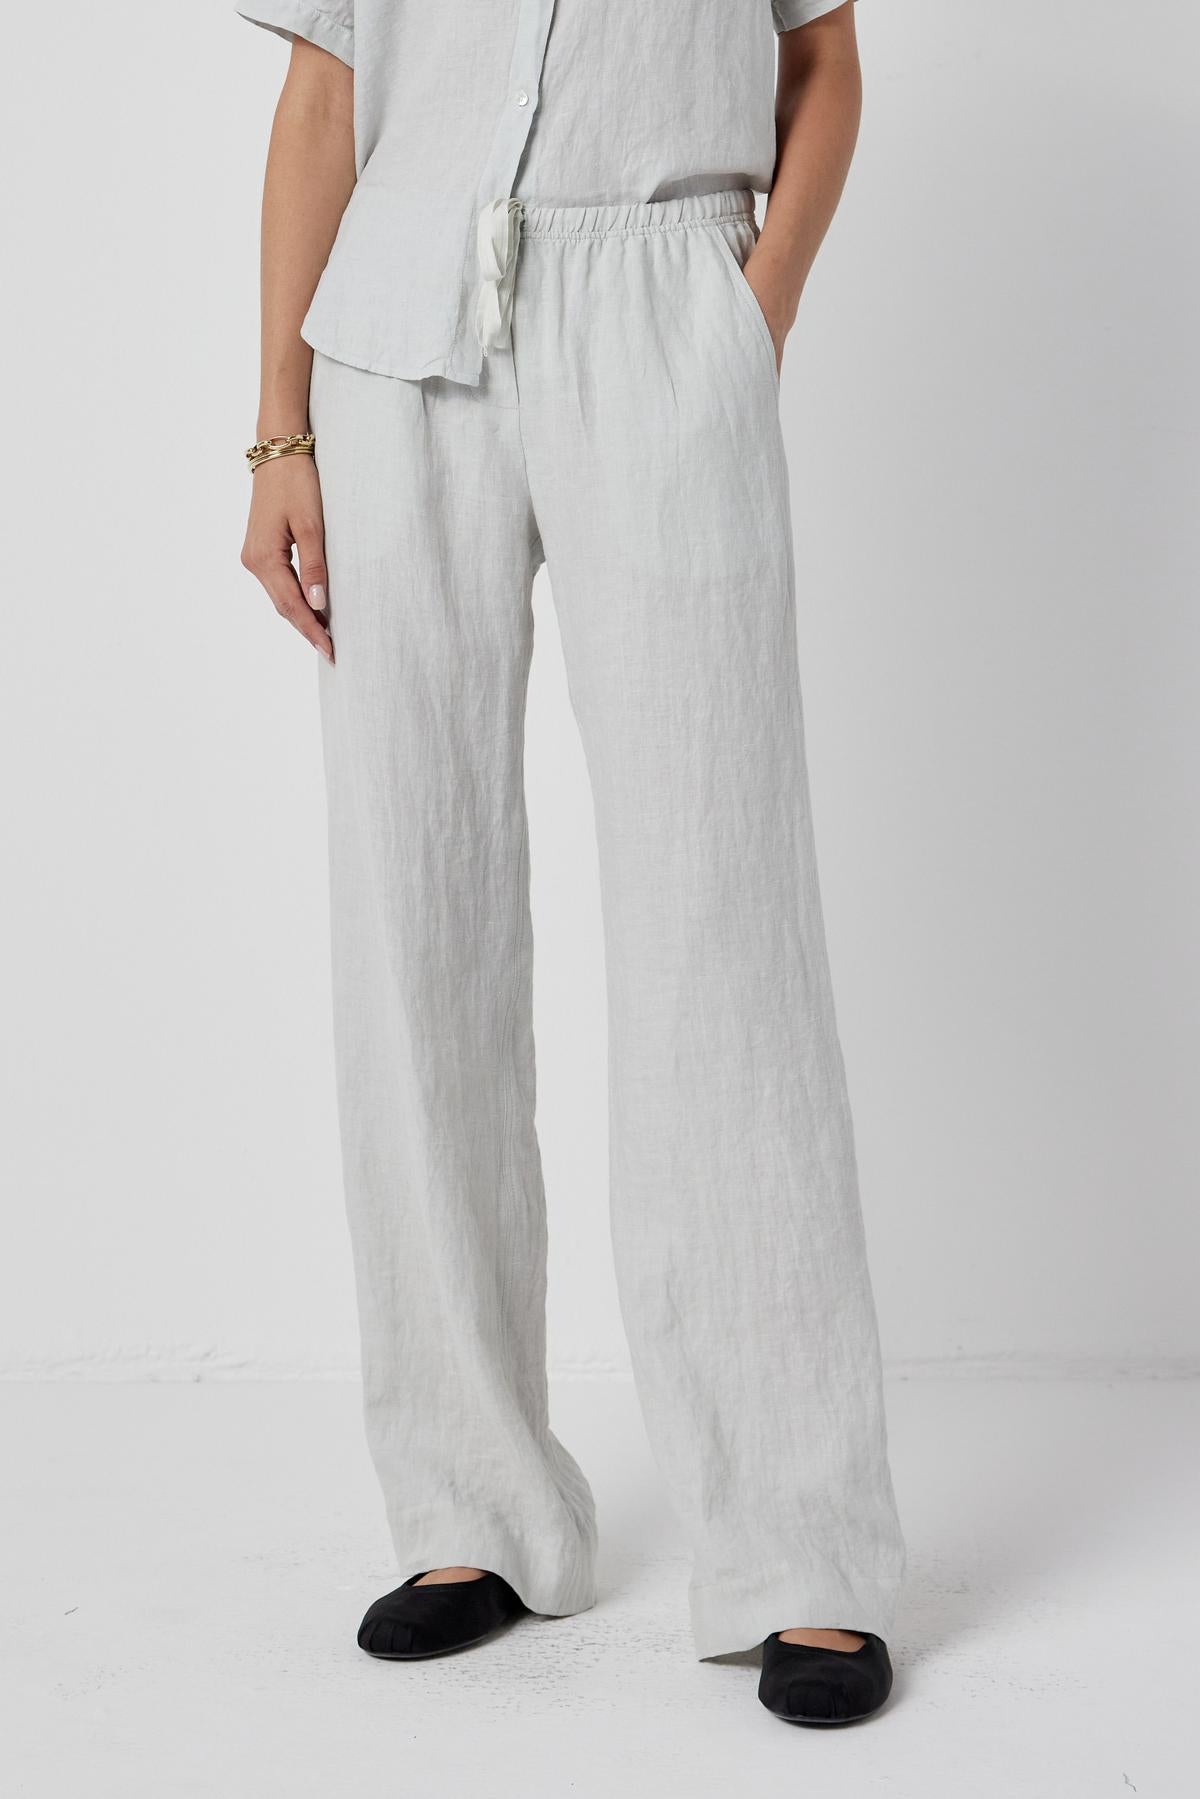 The model is wearing Velvet by Jenny Graham's PICO PANT, a relaxed fit linen pants with an elastic waistband, and a white shirt.-36168821276865